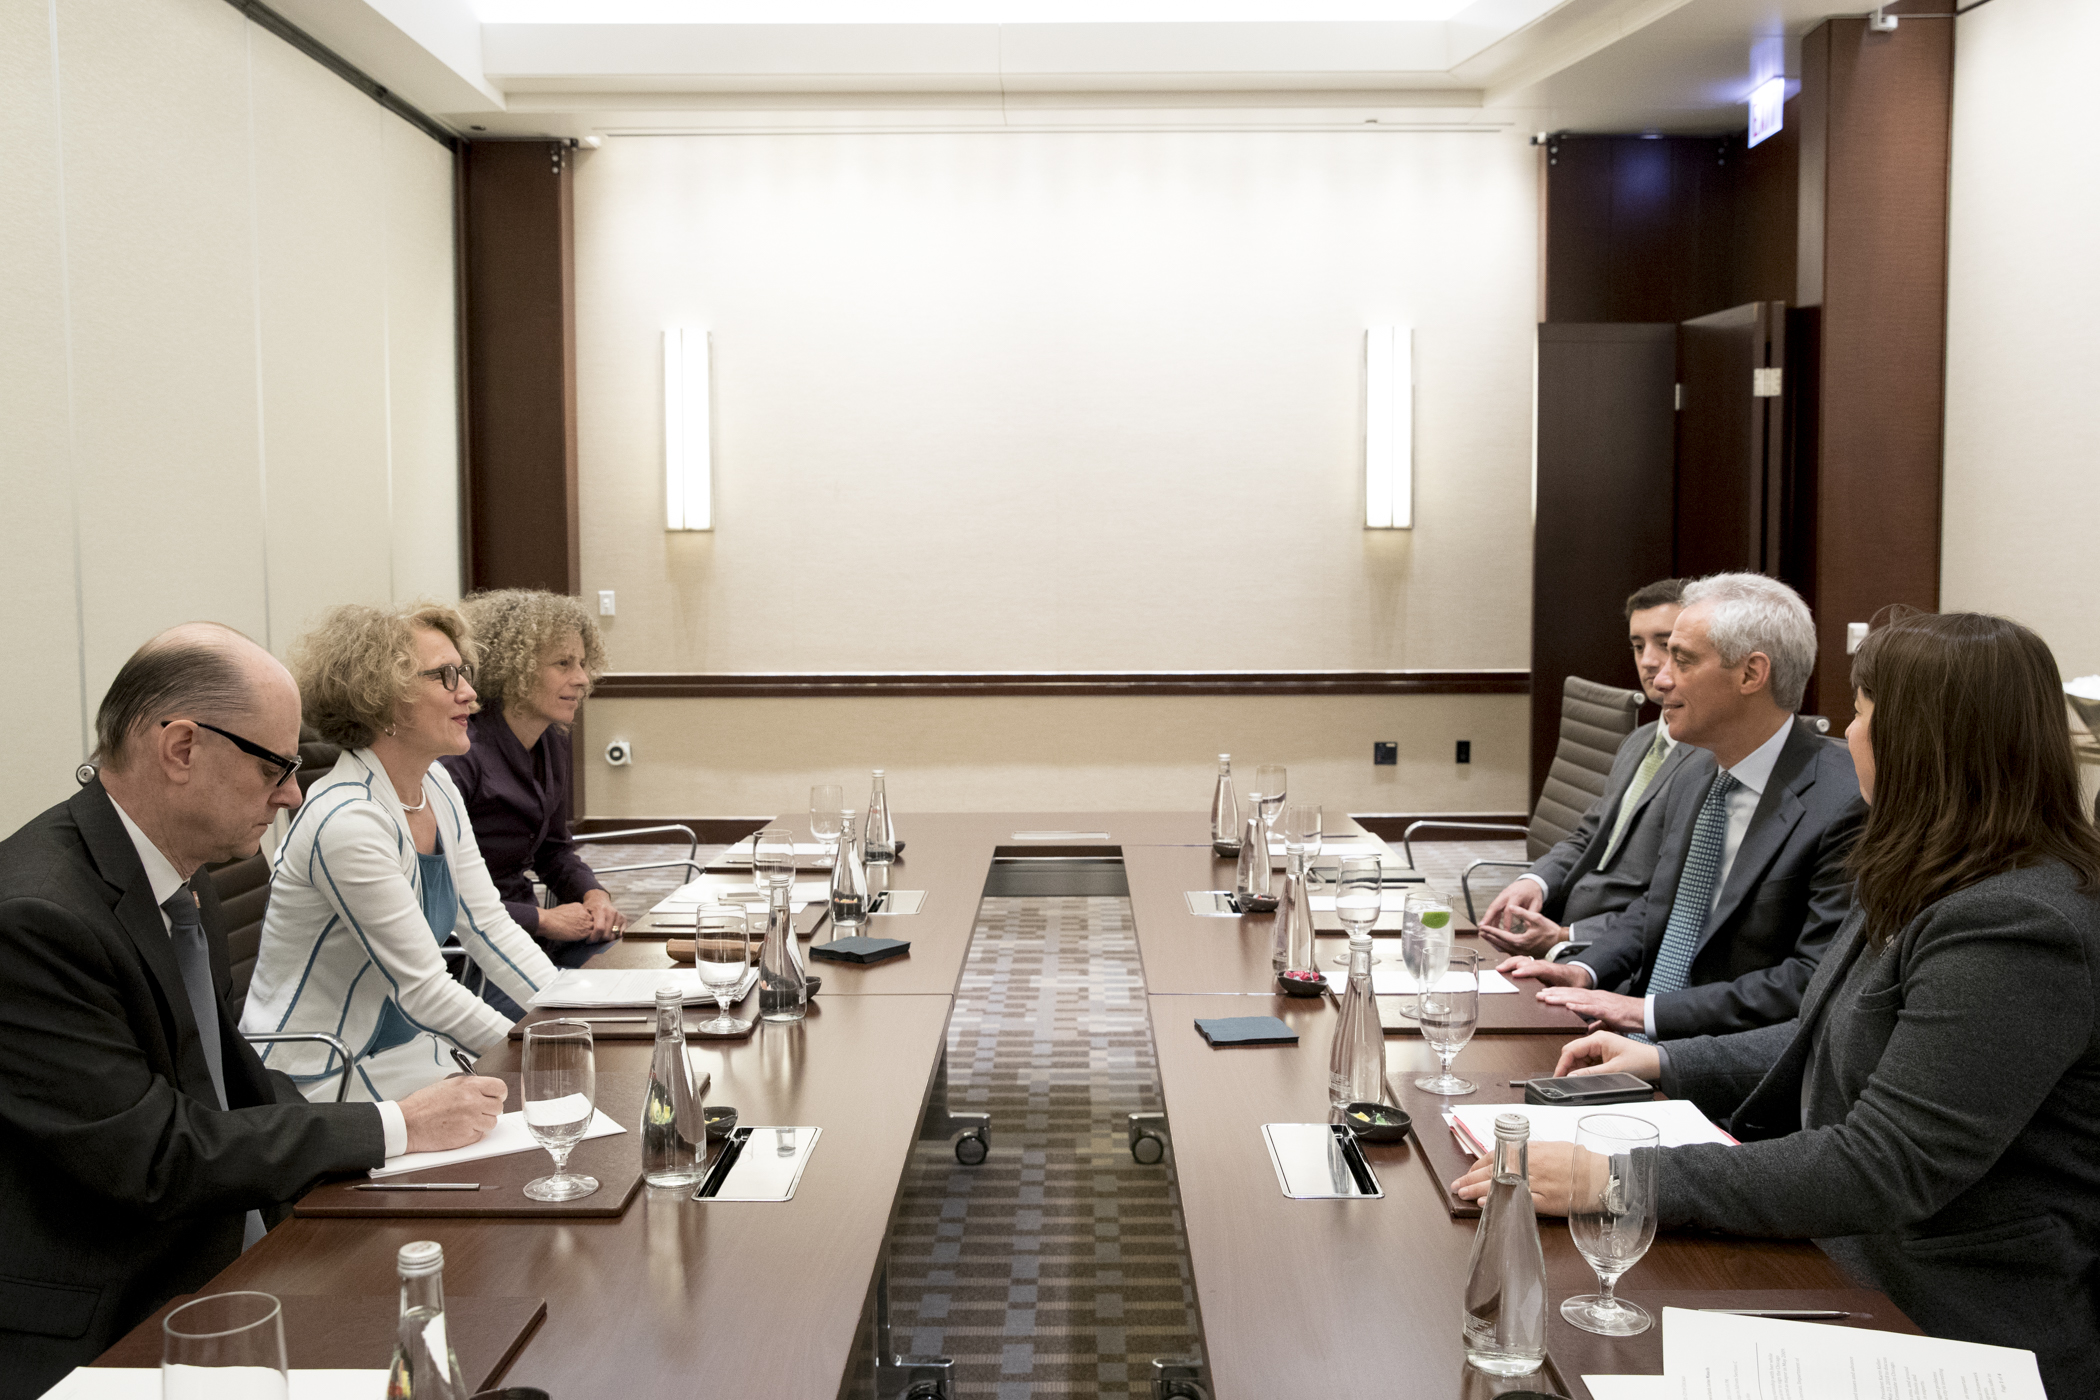 Bilateral meeting between Zurich Mayor Corine Mauch and Mayor Rahm Emanuel in Chicago